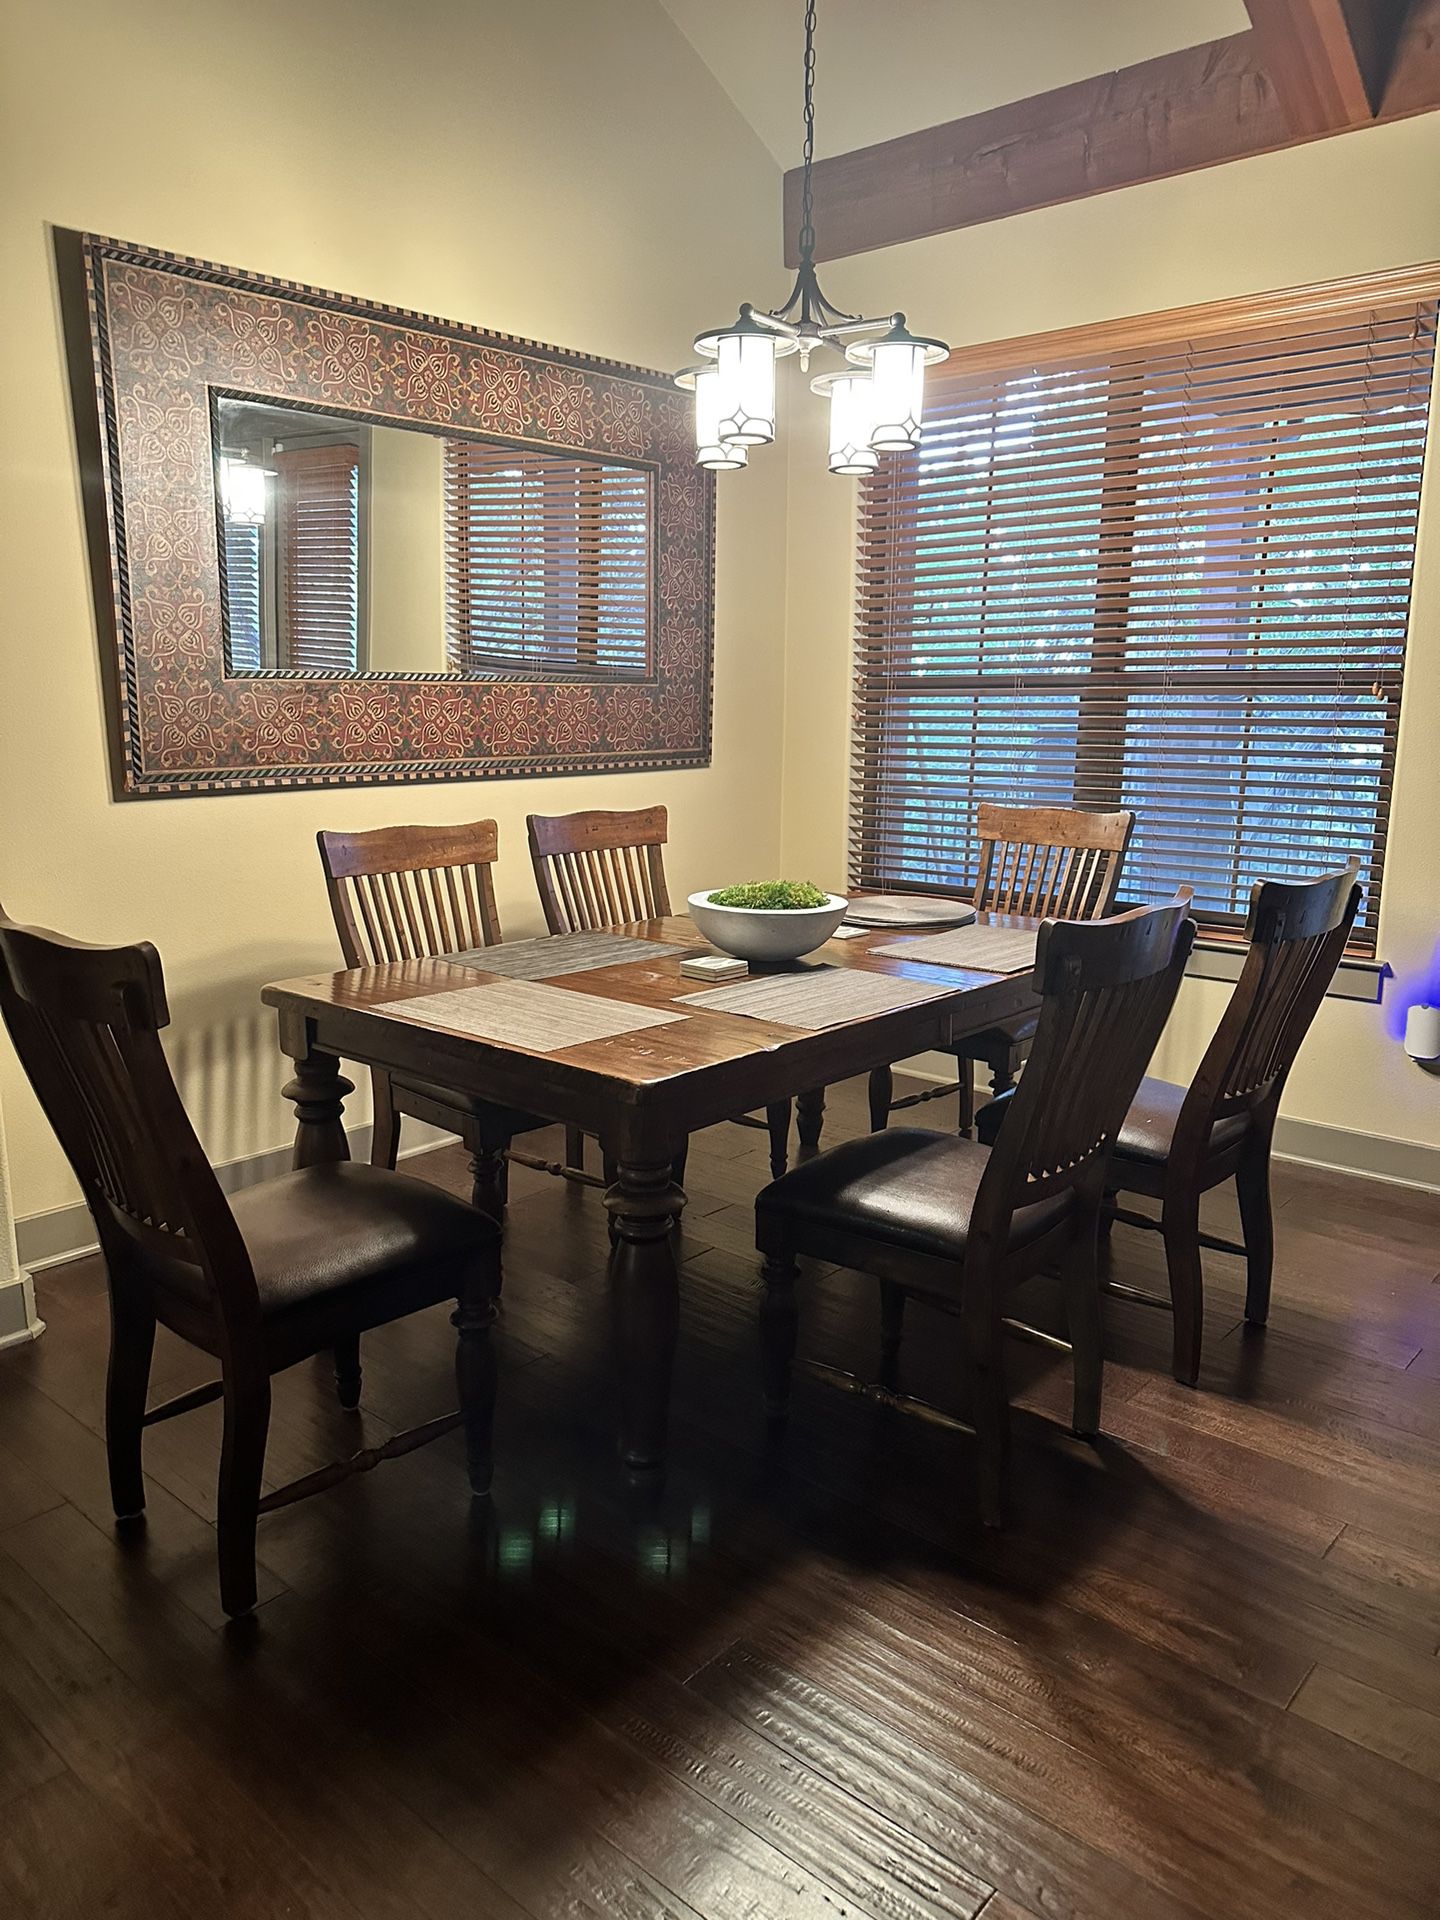 Dining Room With 6 Chairs